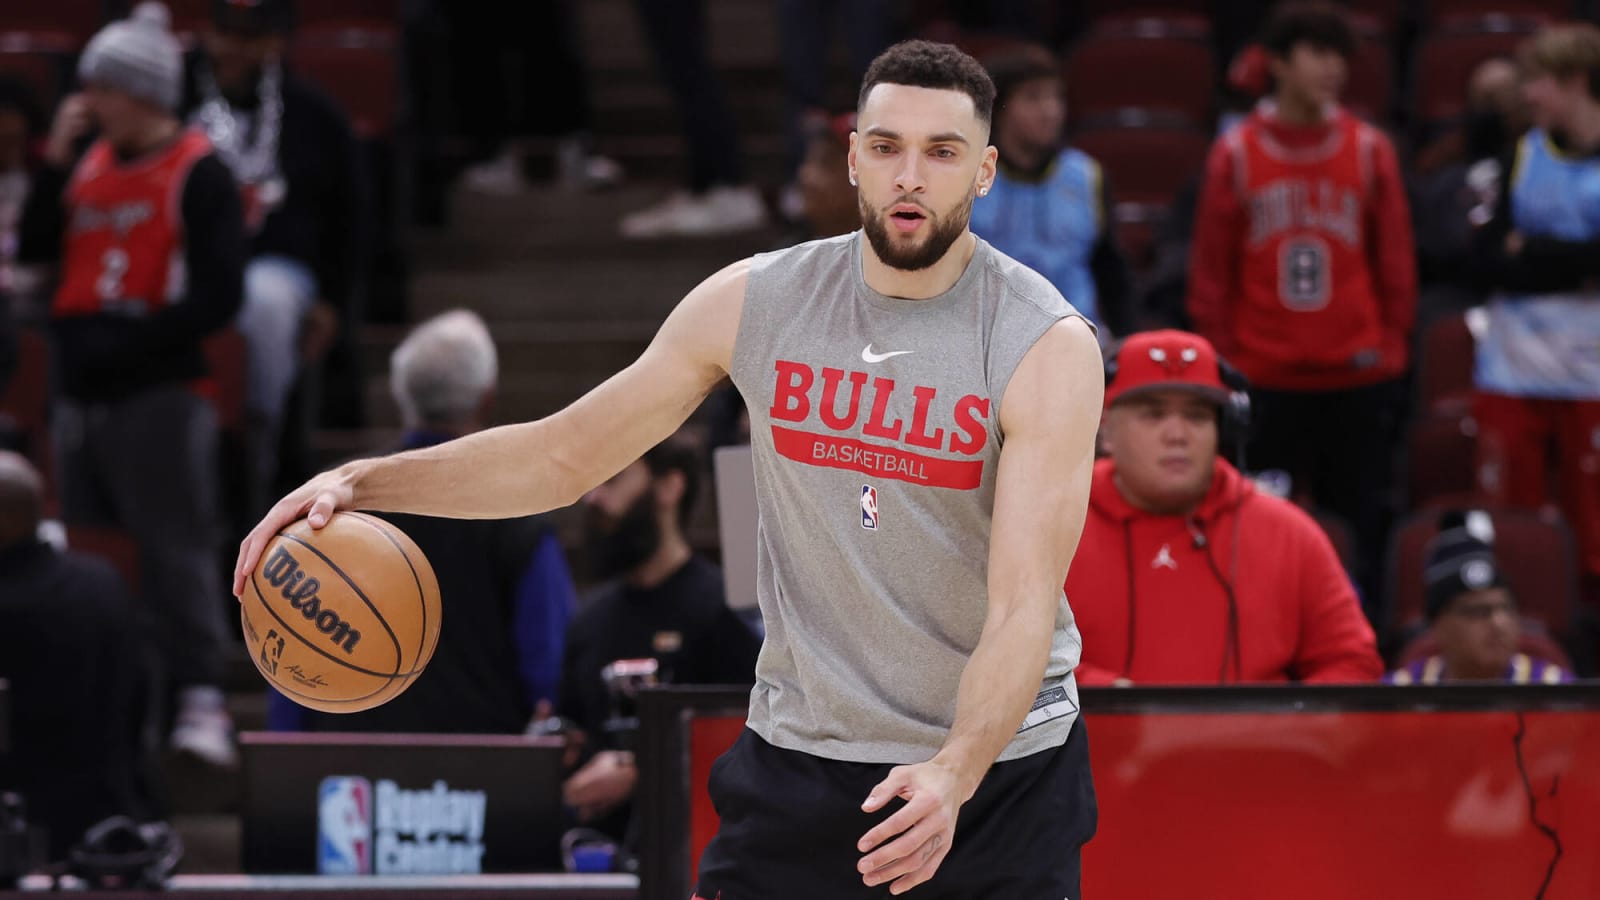 Insider: Lakers attempting trade for Bulls’ Zach LaVine would be ‘ill-advised’